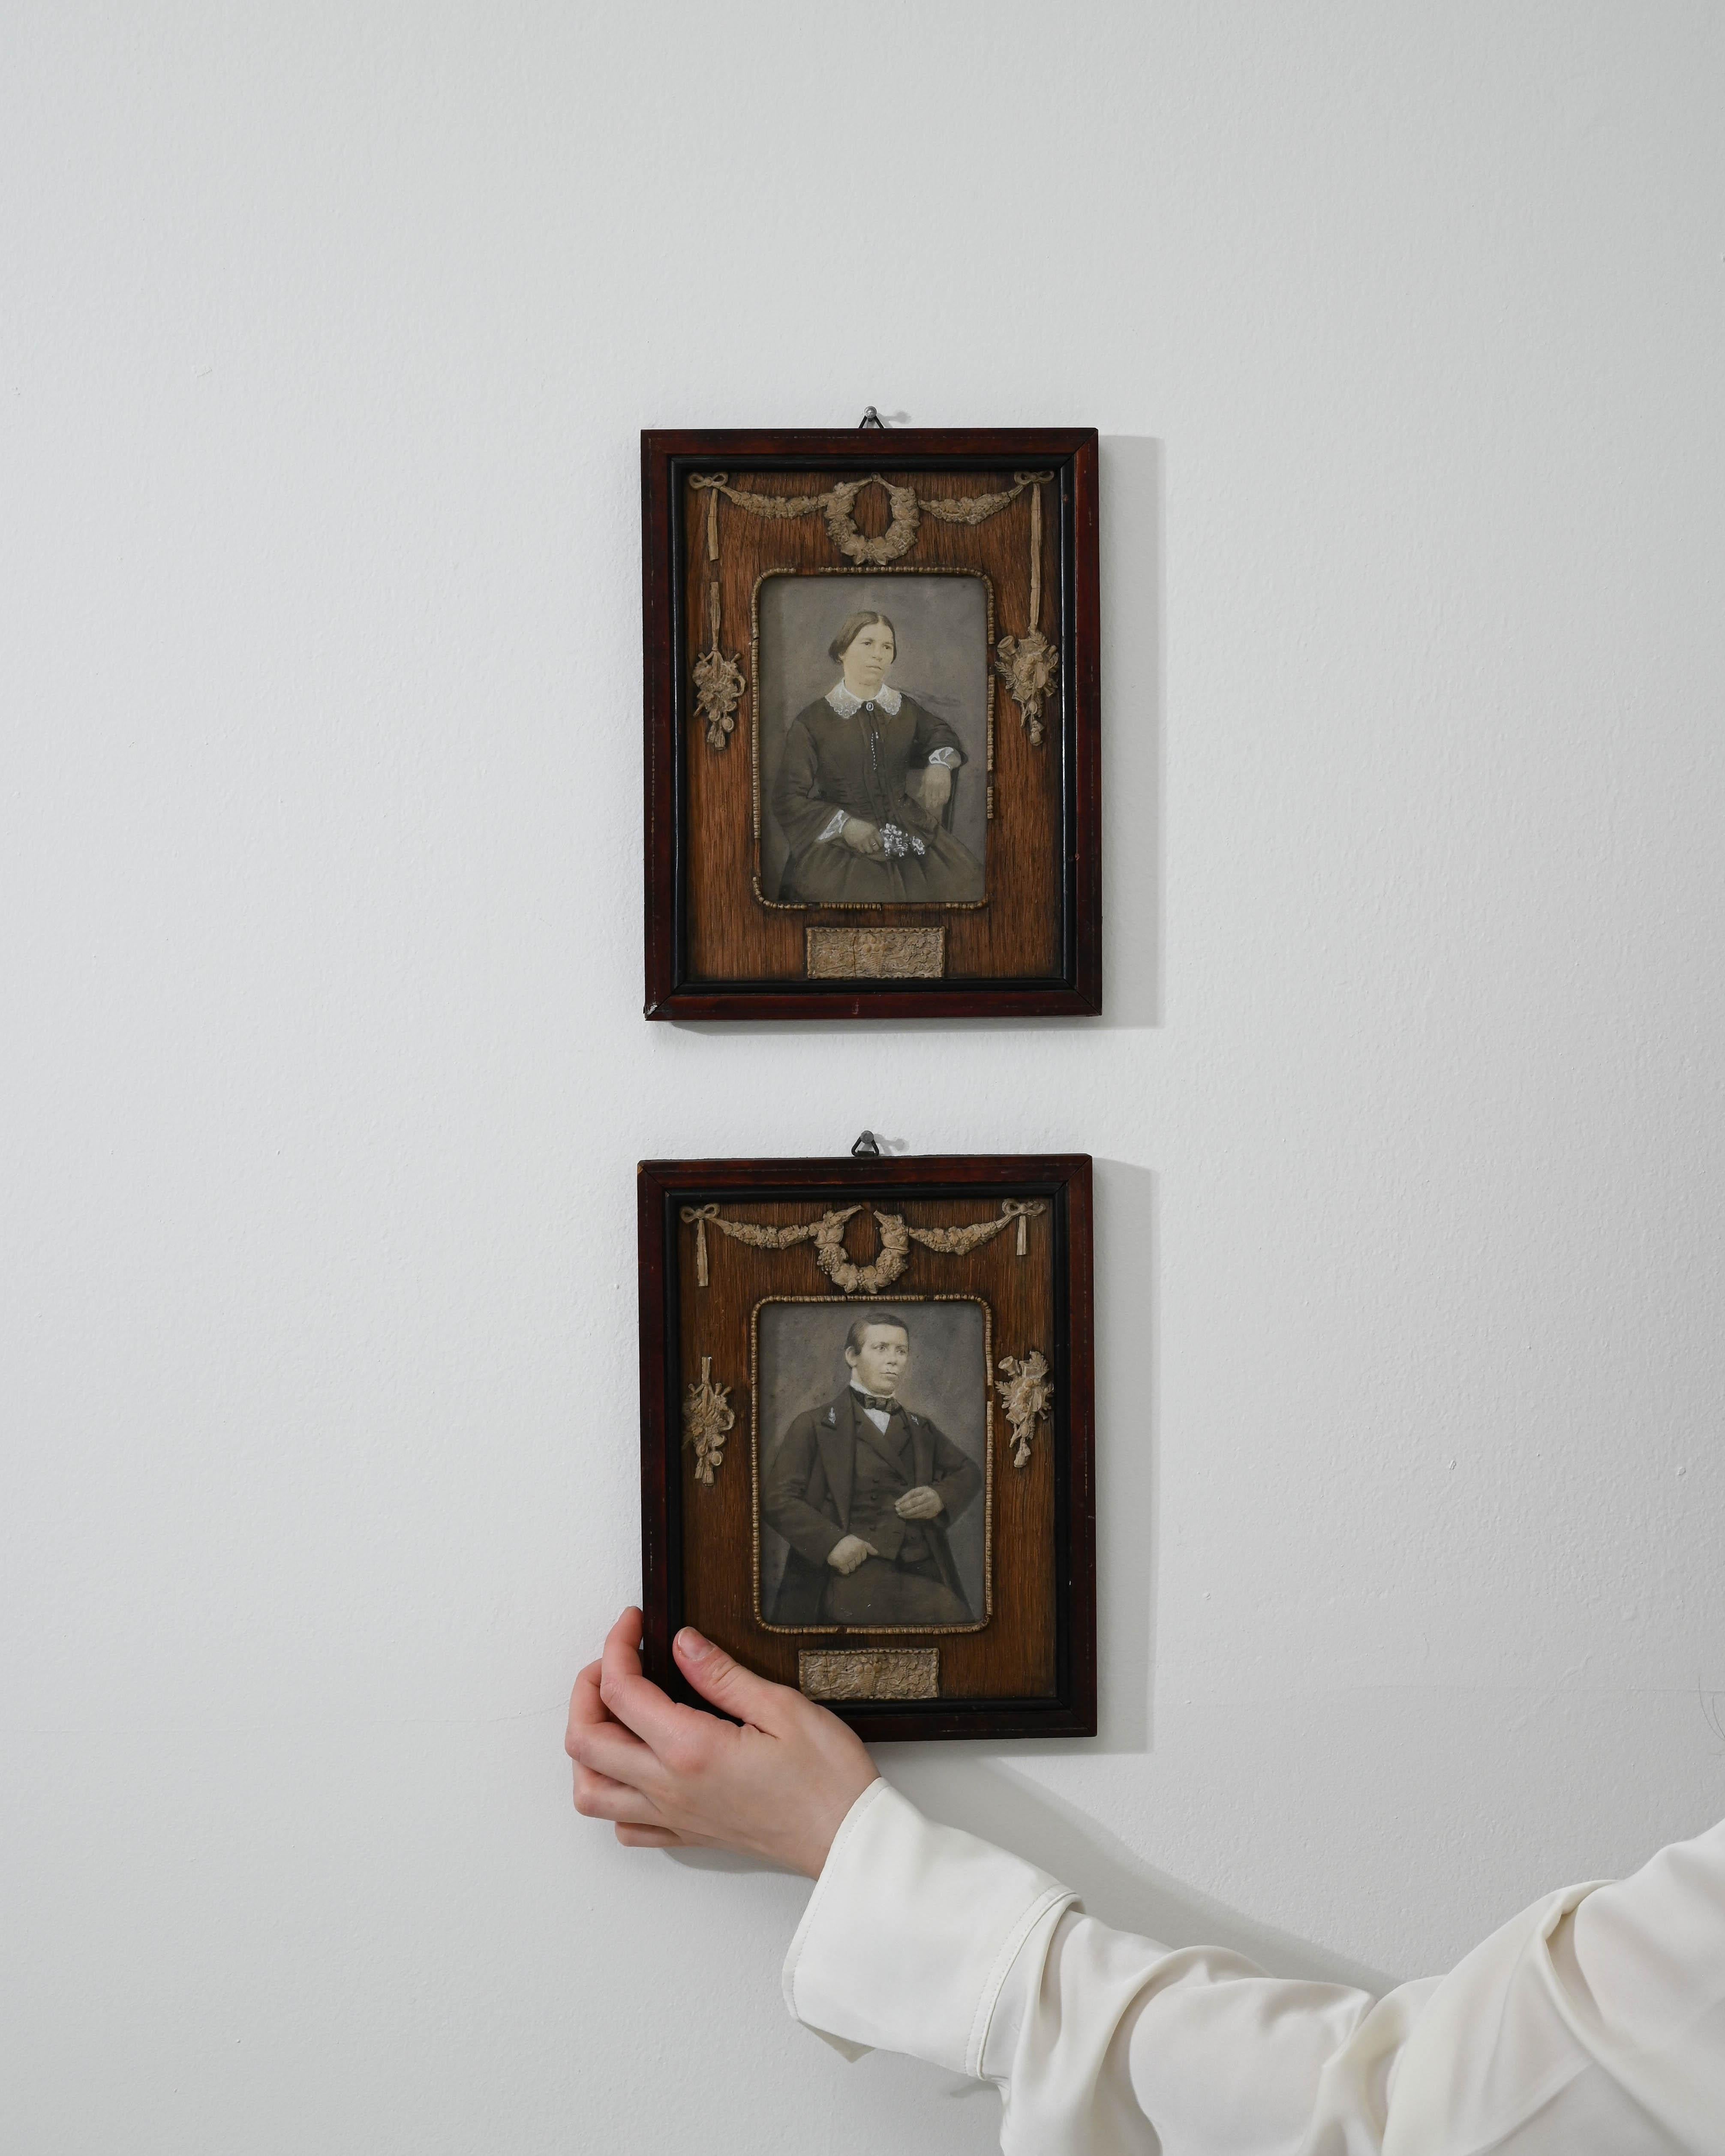 Enrich your space with the timeless allure of this Pair of 19th Century French Artworks adorned with exquisite wooden frames. Each frame tells a story, one featuring a captivating portrayal of a woman and the other of a distinguished man from the